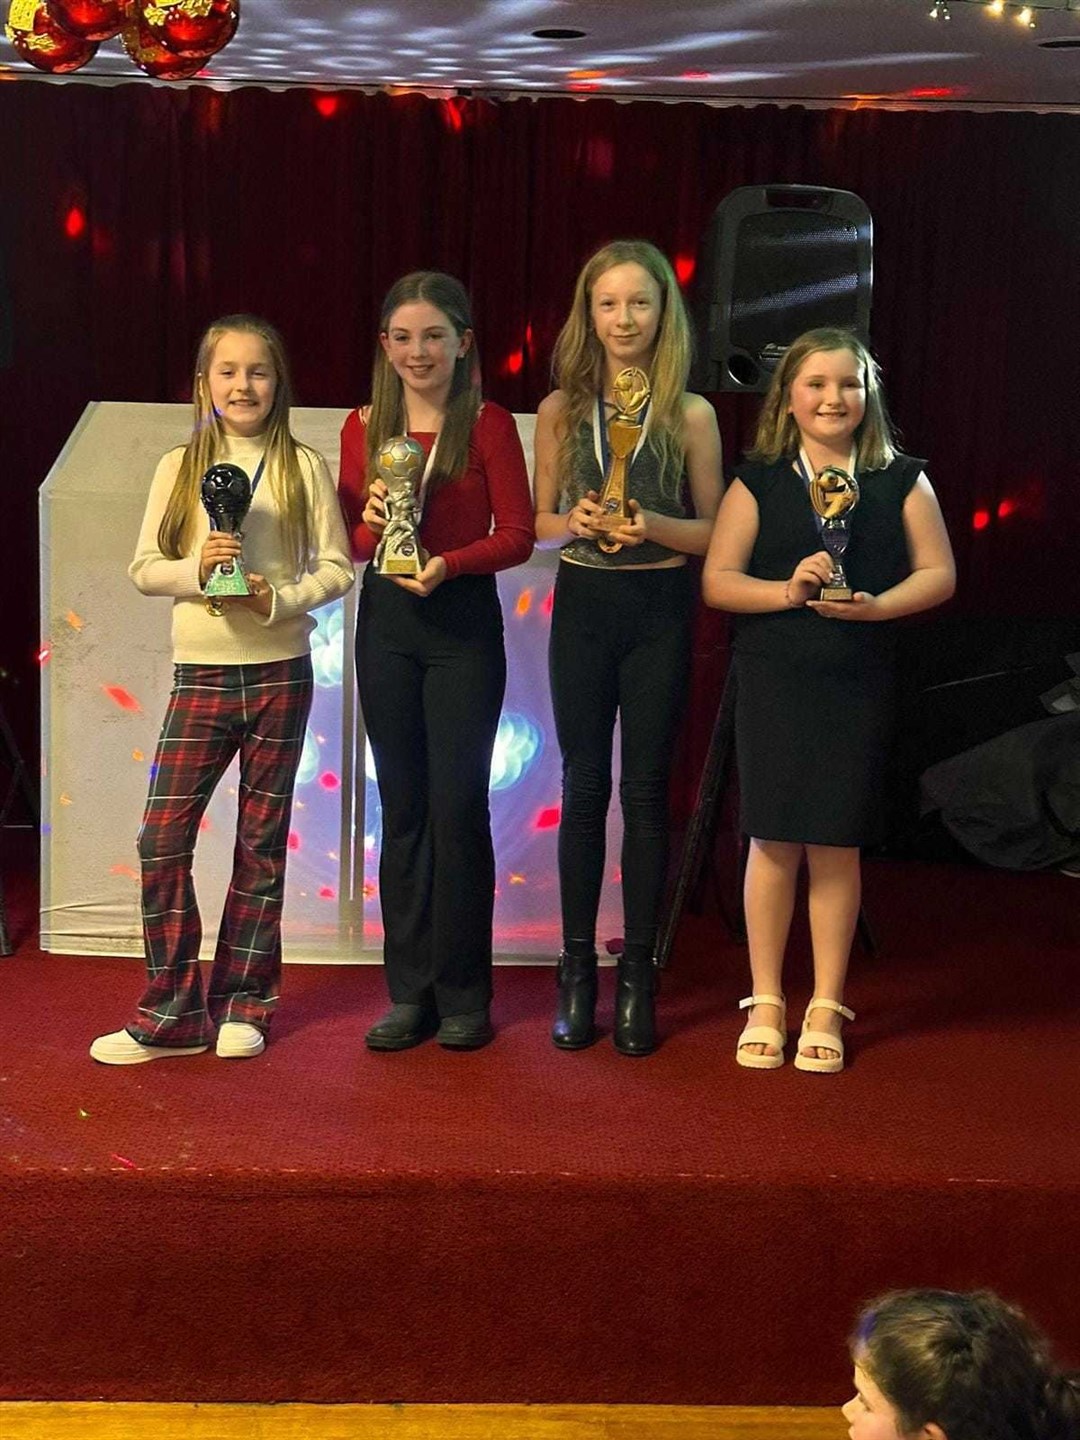 Ross County's under-12 girls award winners for 2023 - Ethos award: Madison Manson. Most improved: Lily Munro. Player's player: Jorgie Gordon. Player of the year: Blair Taylor